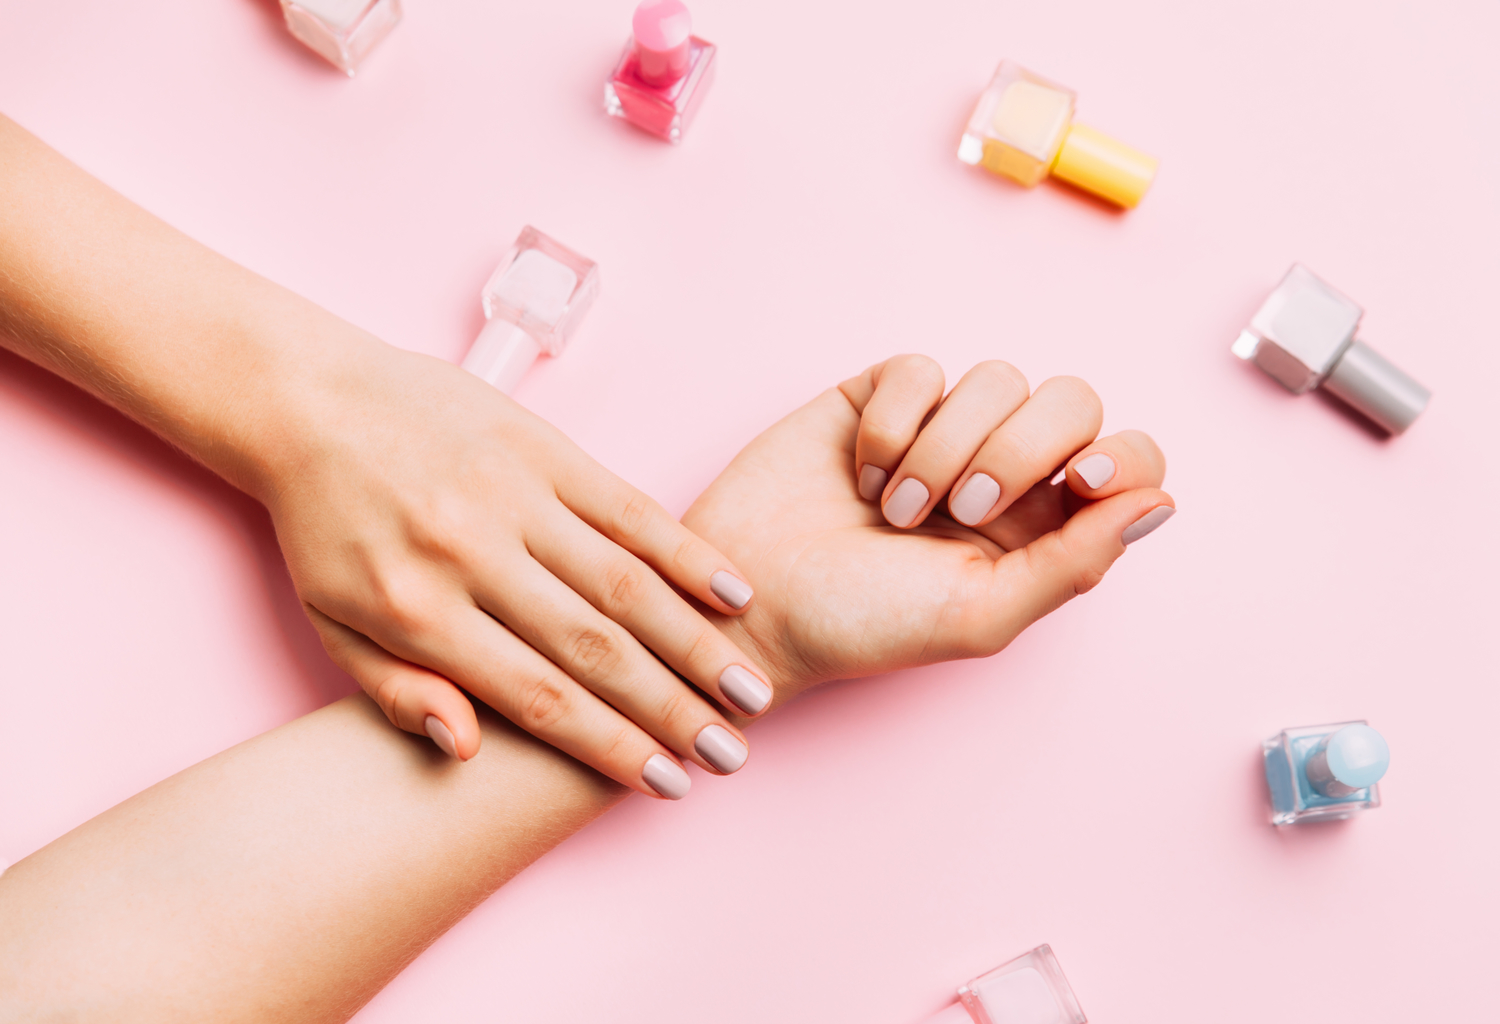 7. "The Latest Nail Color Trends You Need to Know" - wide 6